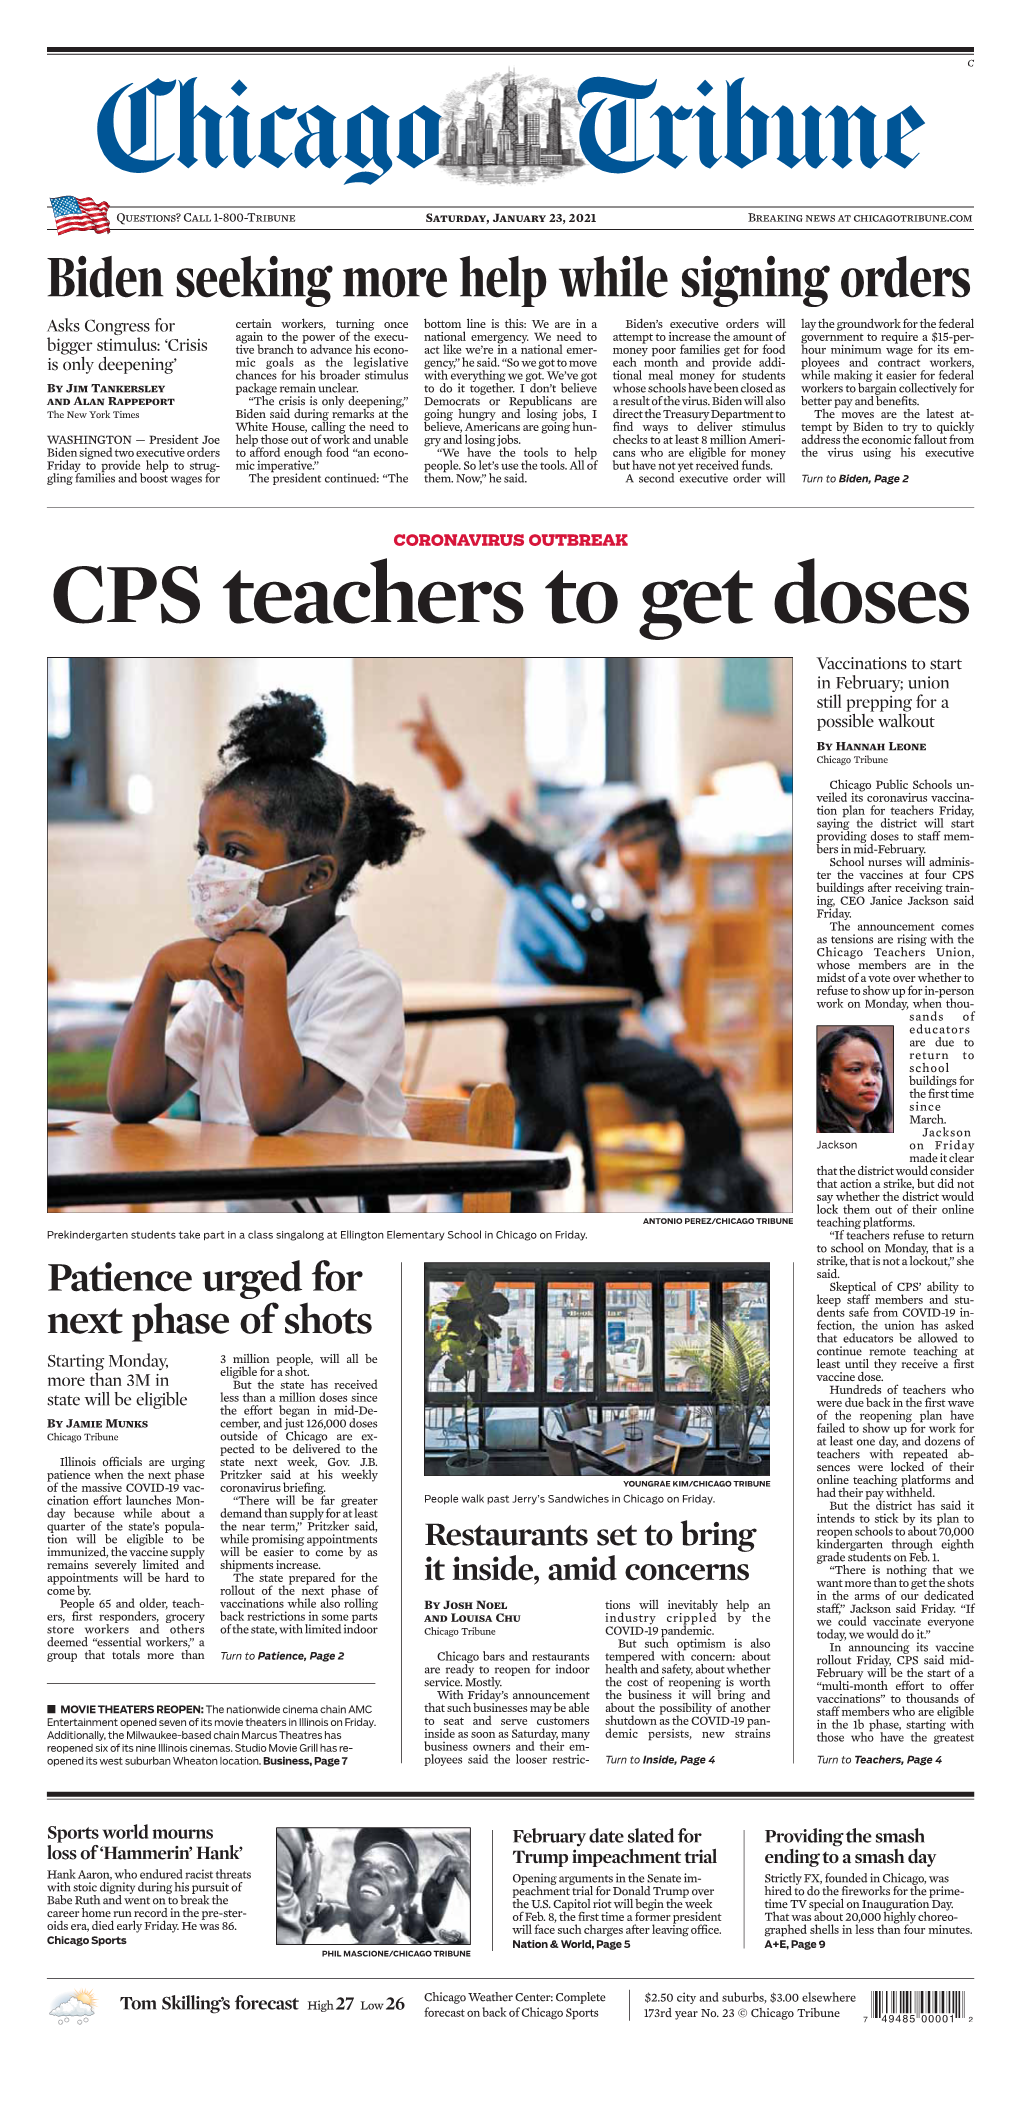 CPS Teachers to Get Doses Vaccinations to Start in February; Union Still Prepping for a Possible Walkout by Hannah Leone Chicago Tribune